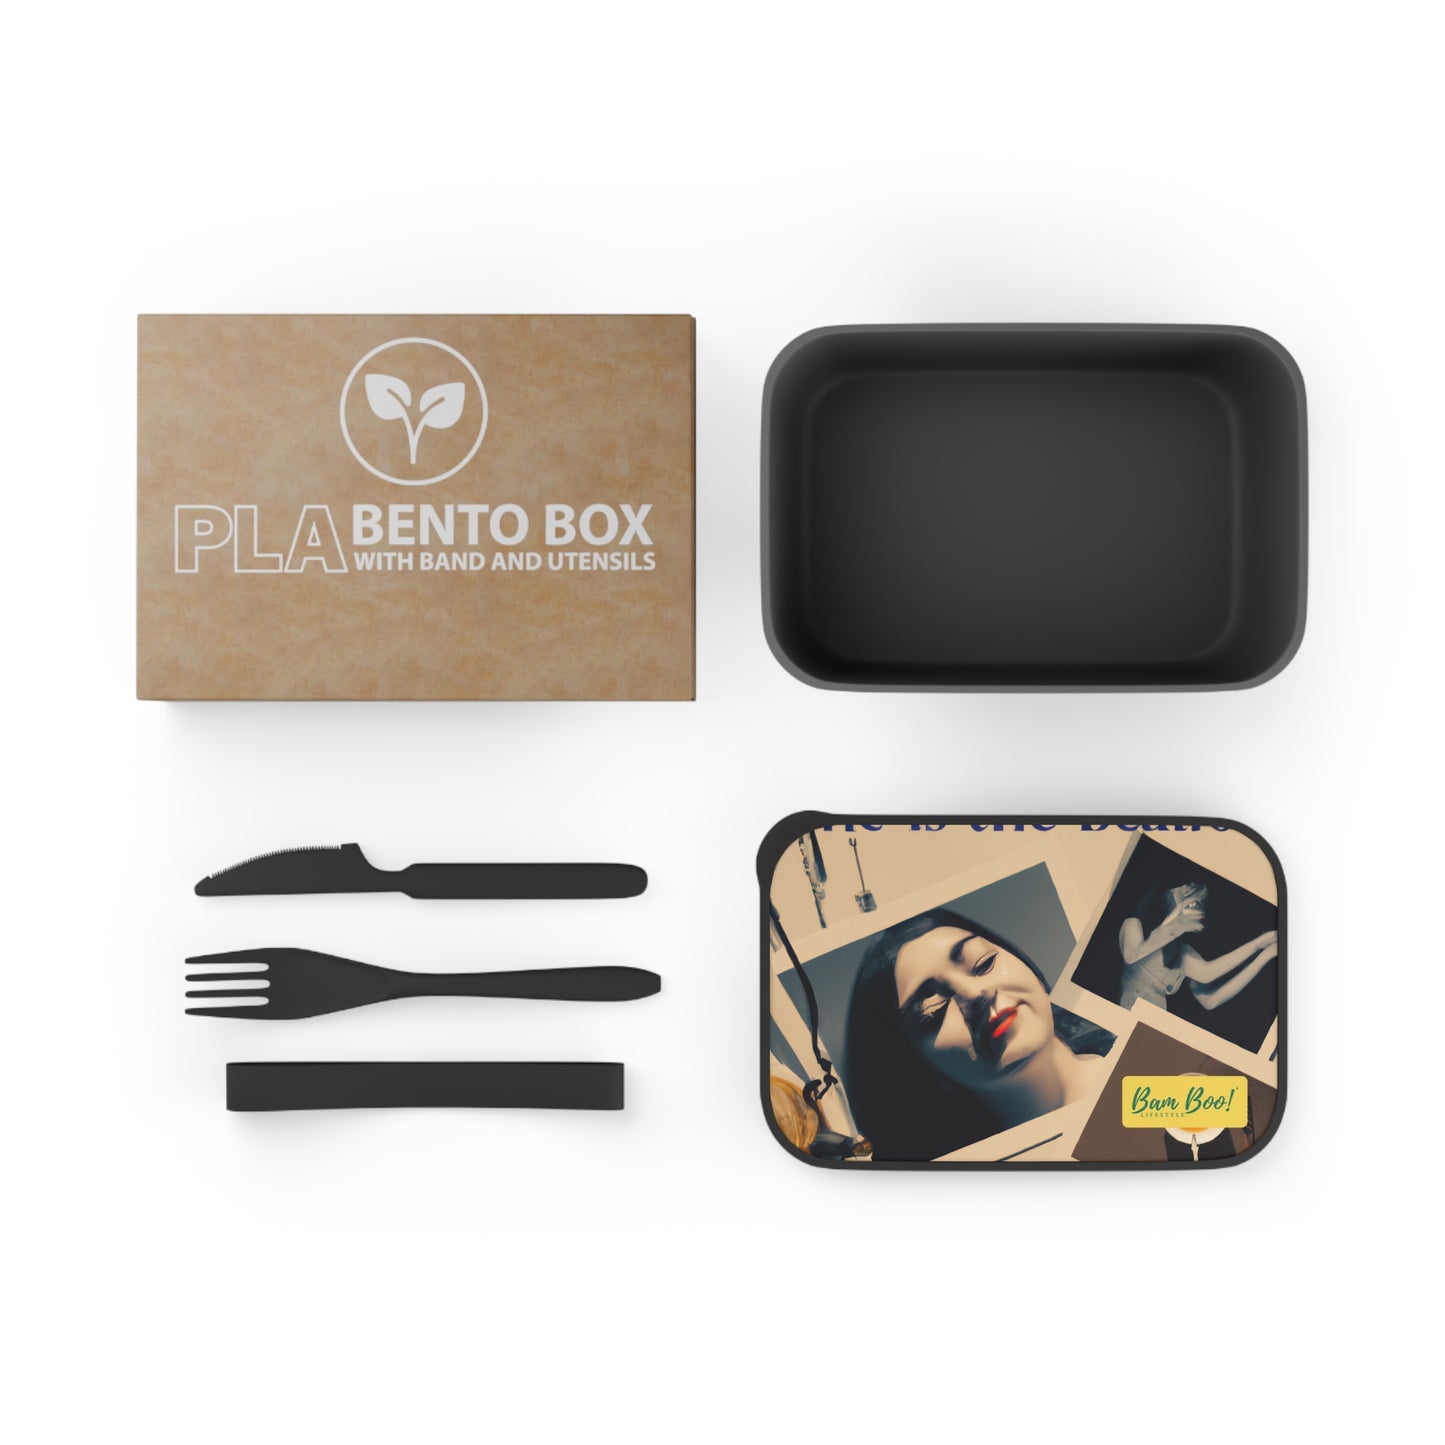 My Creative Journey: A Collage of Self-Reflection. - Bam Boo! Lifestyle Eco-friendly PLA Bento Box with Band and Utensils